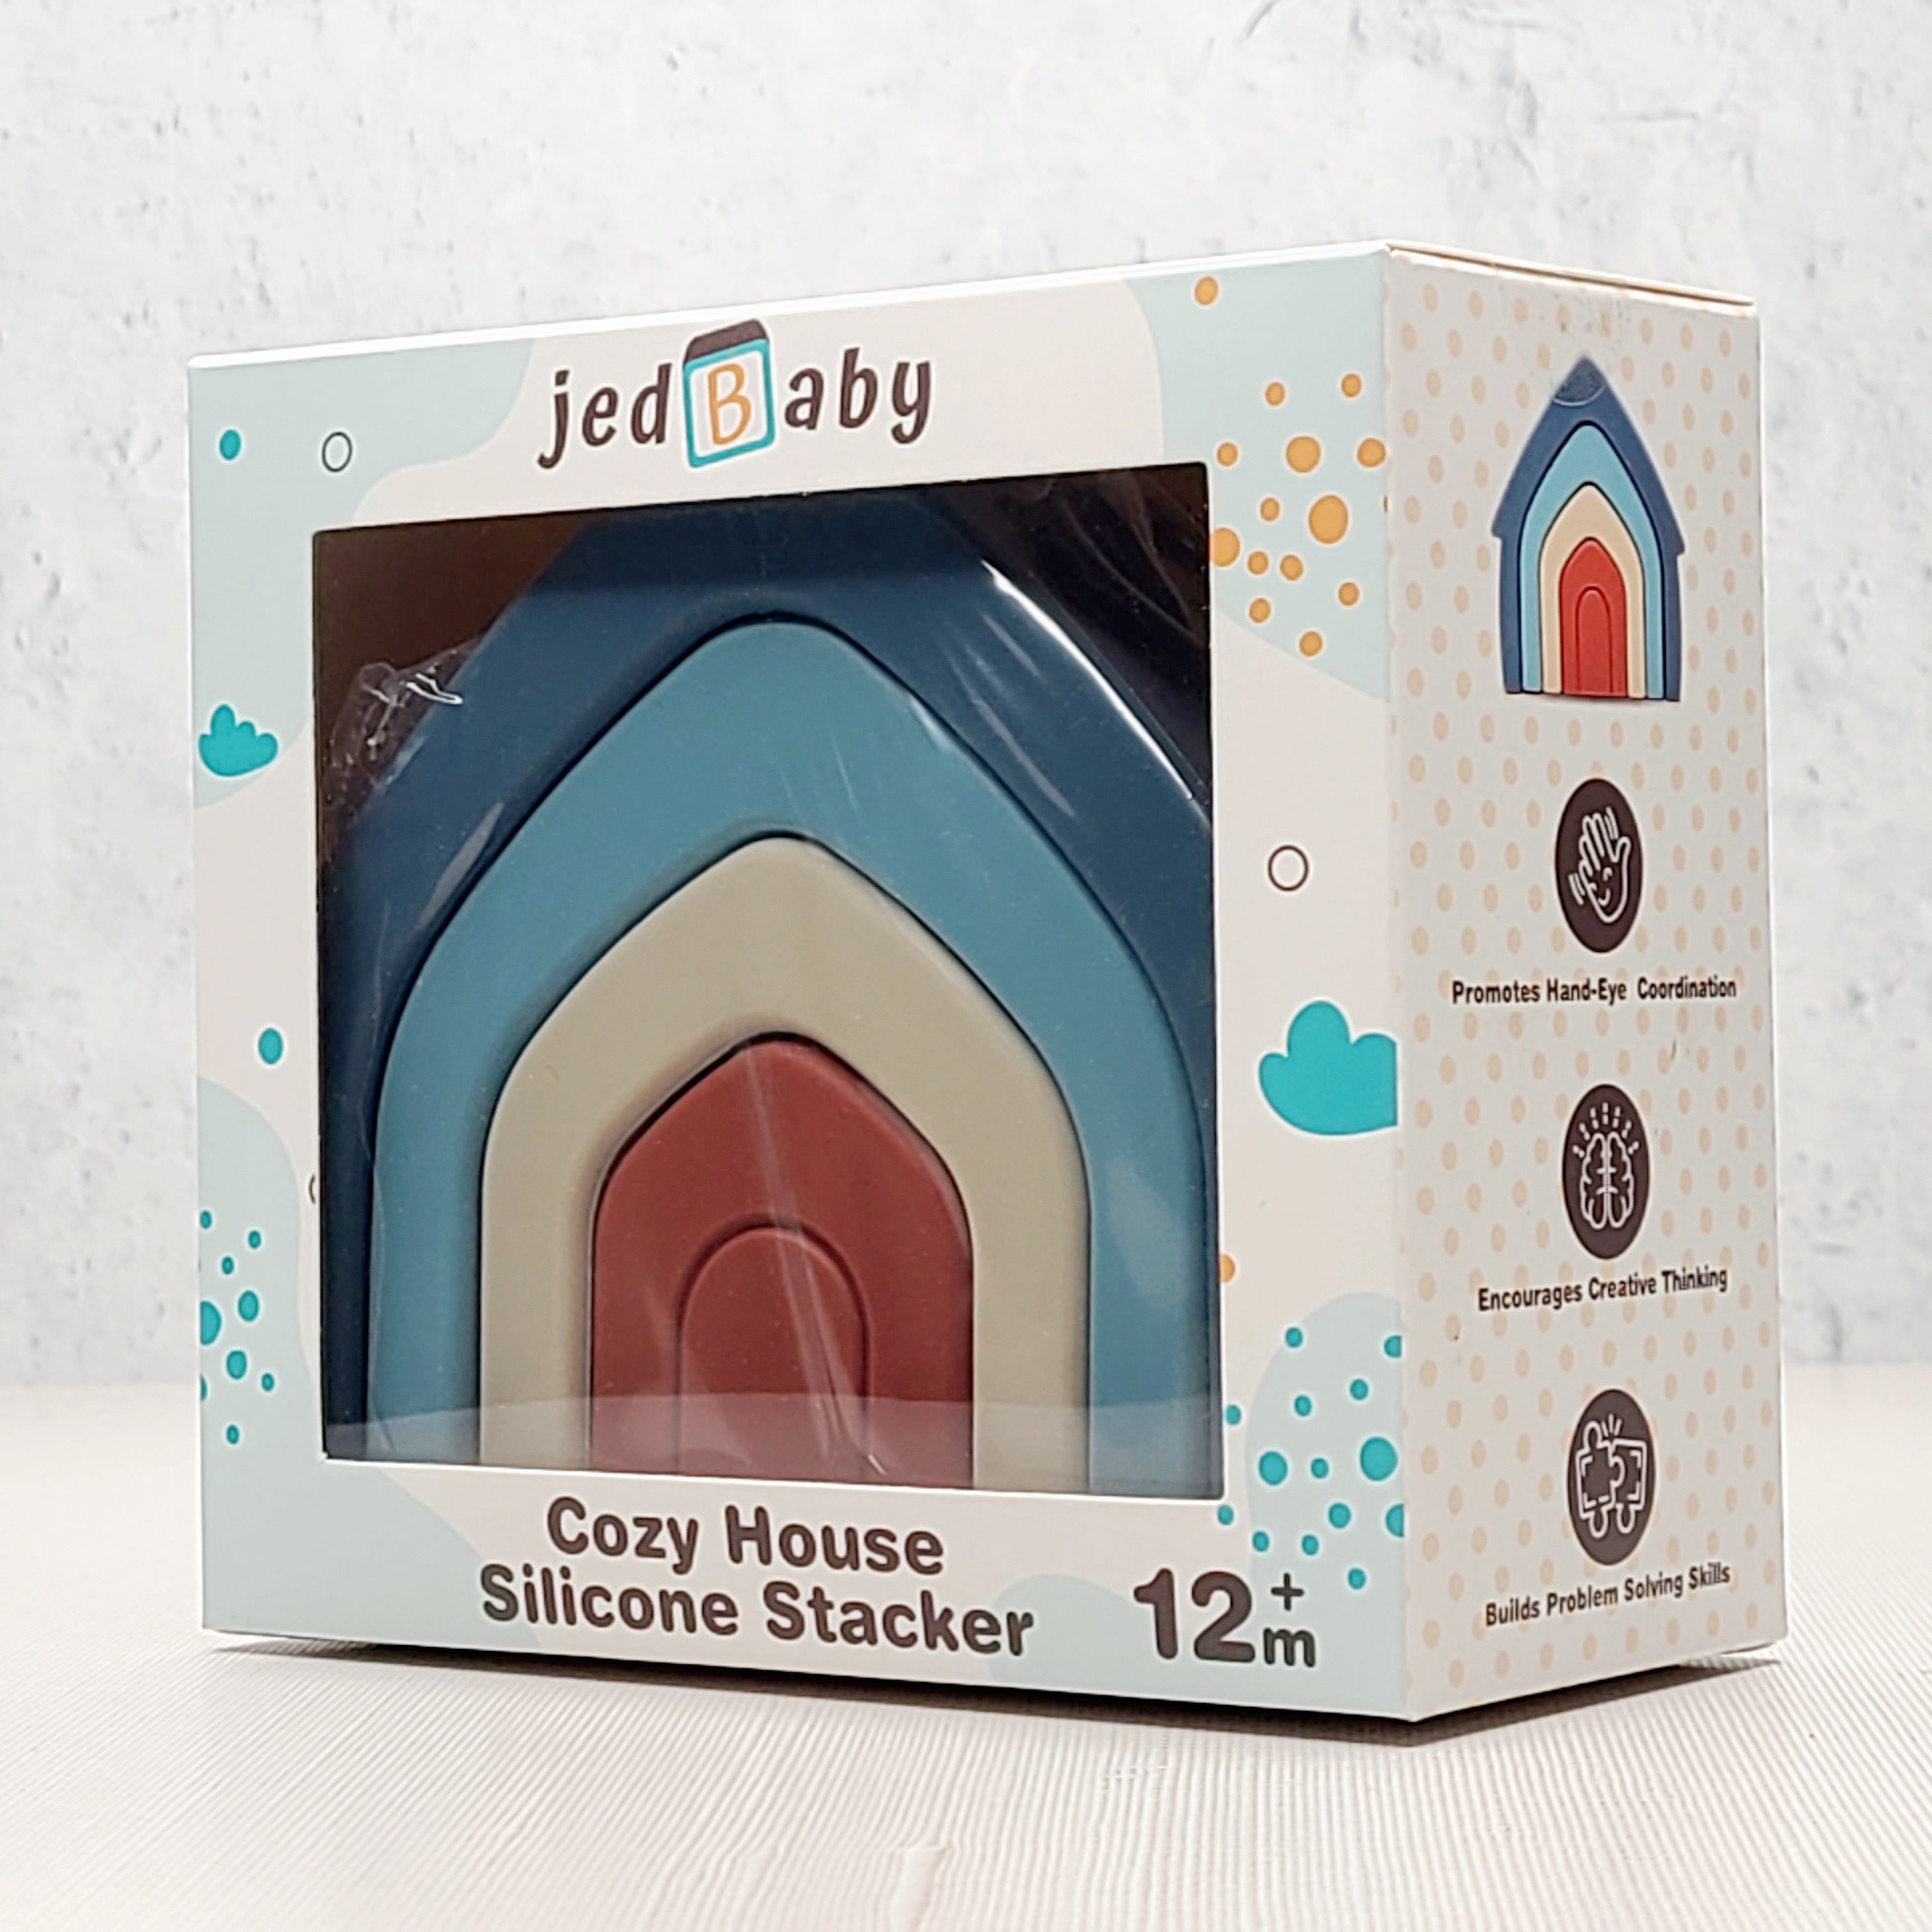 Jedbaby cosy house silicone stacker toy packaging